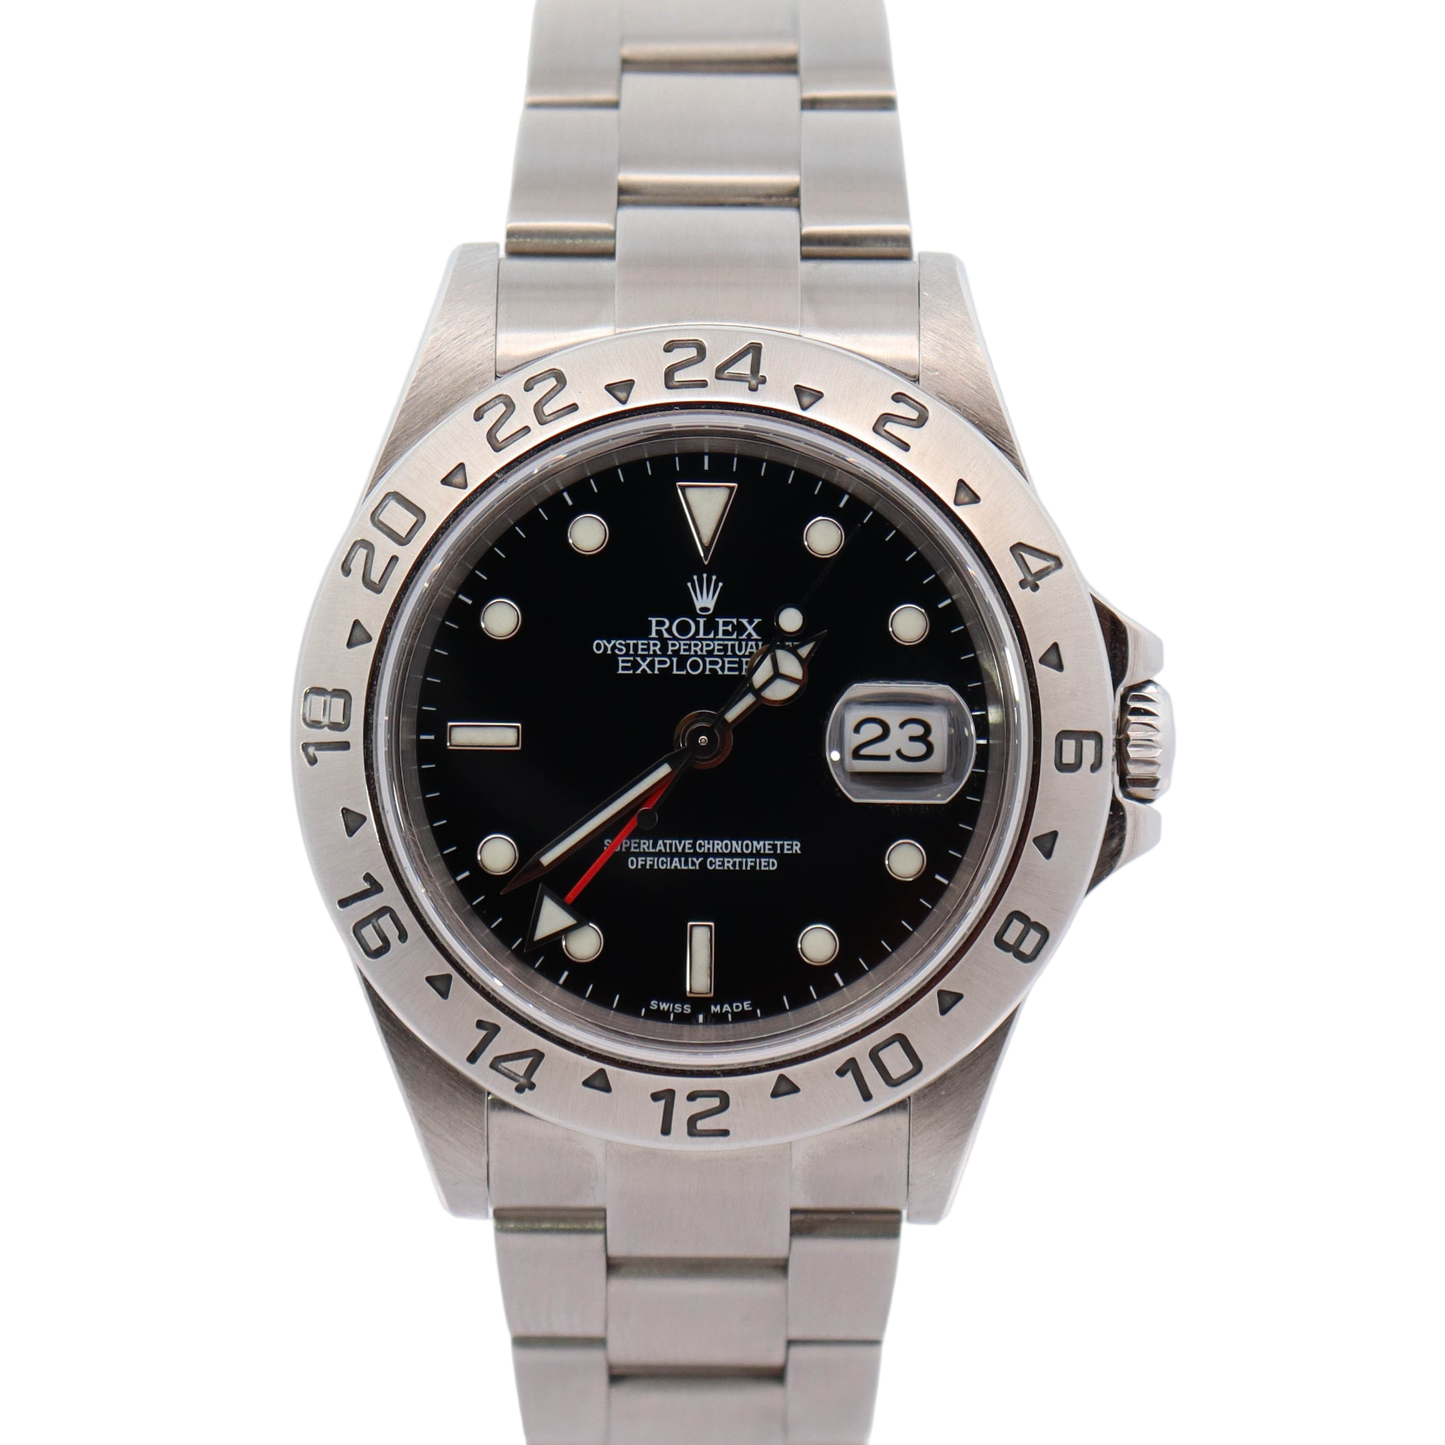 Rolex Explorer II Stainless Steel 40mm Black Dot Dial Watch Reference #: 16570